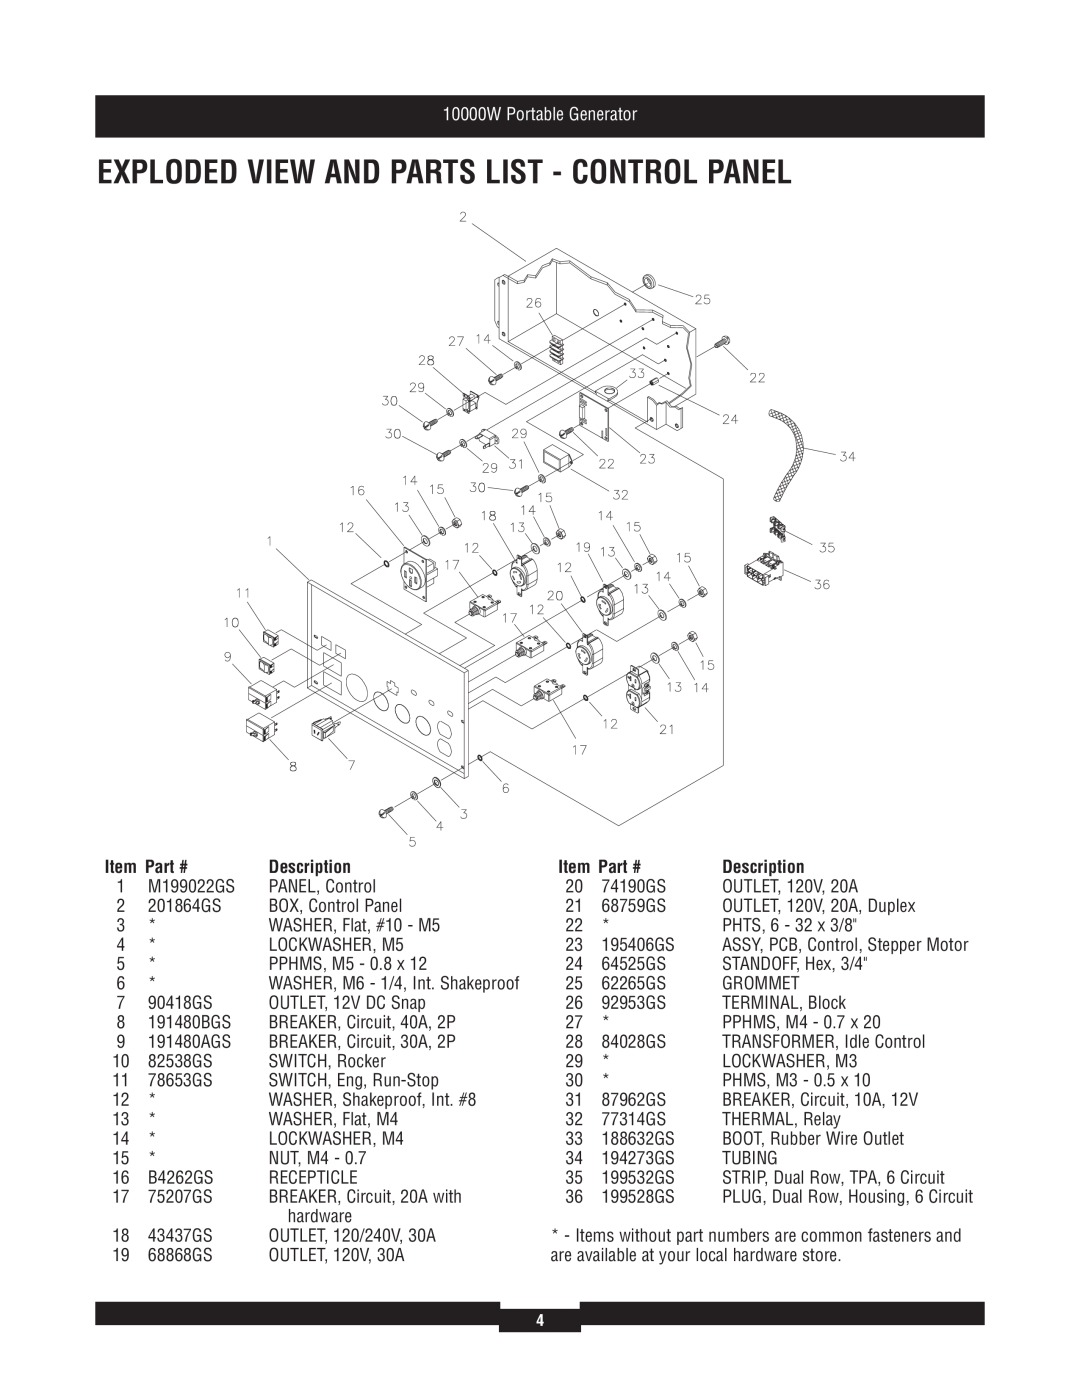 Briggs & Stratton 30207 manual Exploded View And Parts List - Control Panel, Description, 10000W Portable Generator 